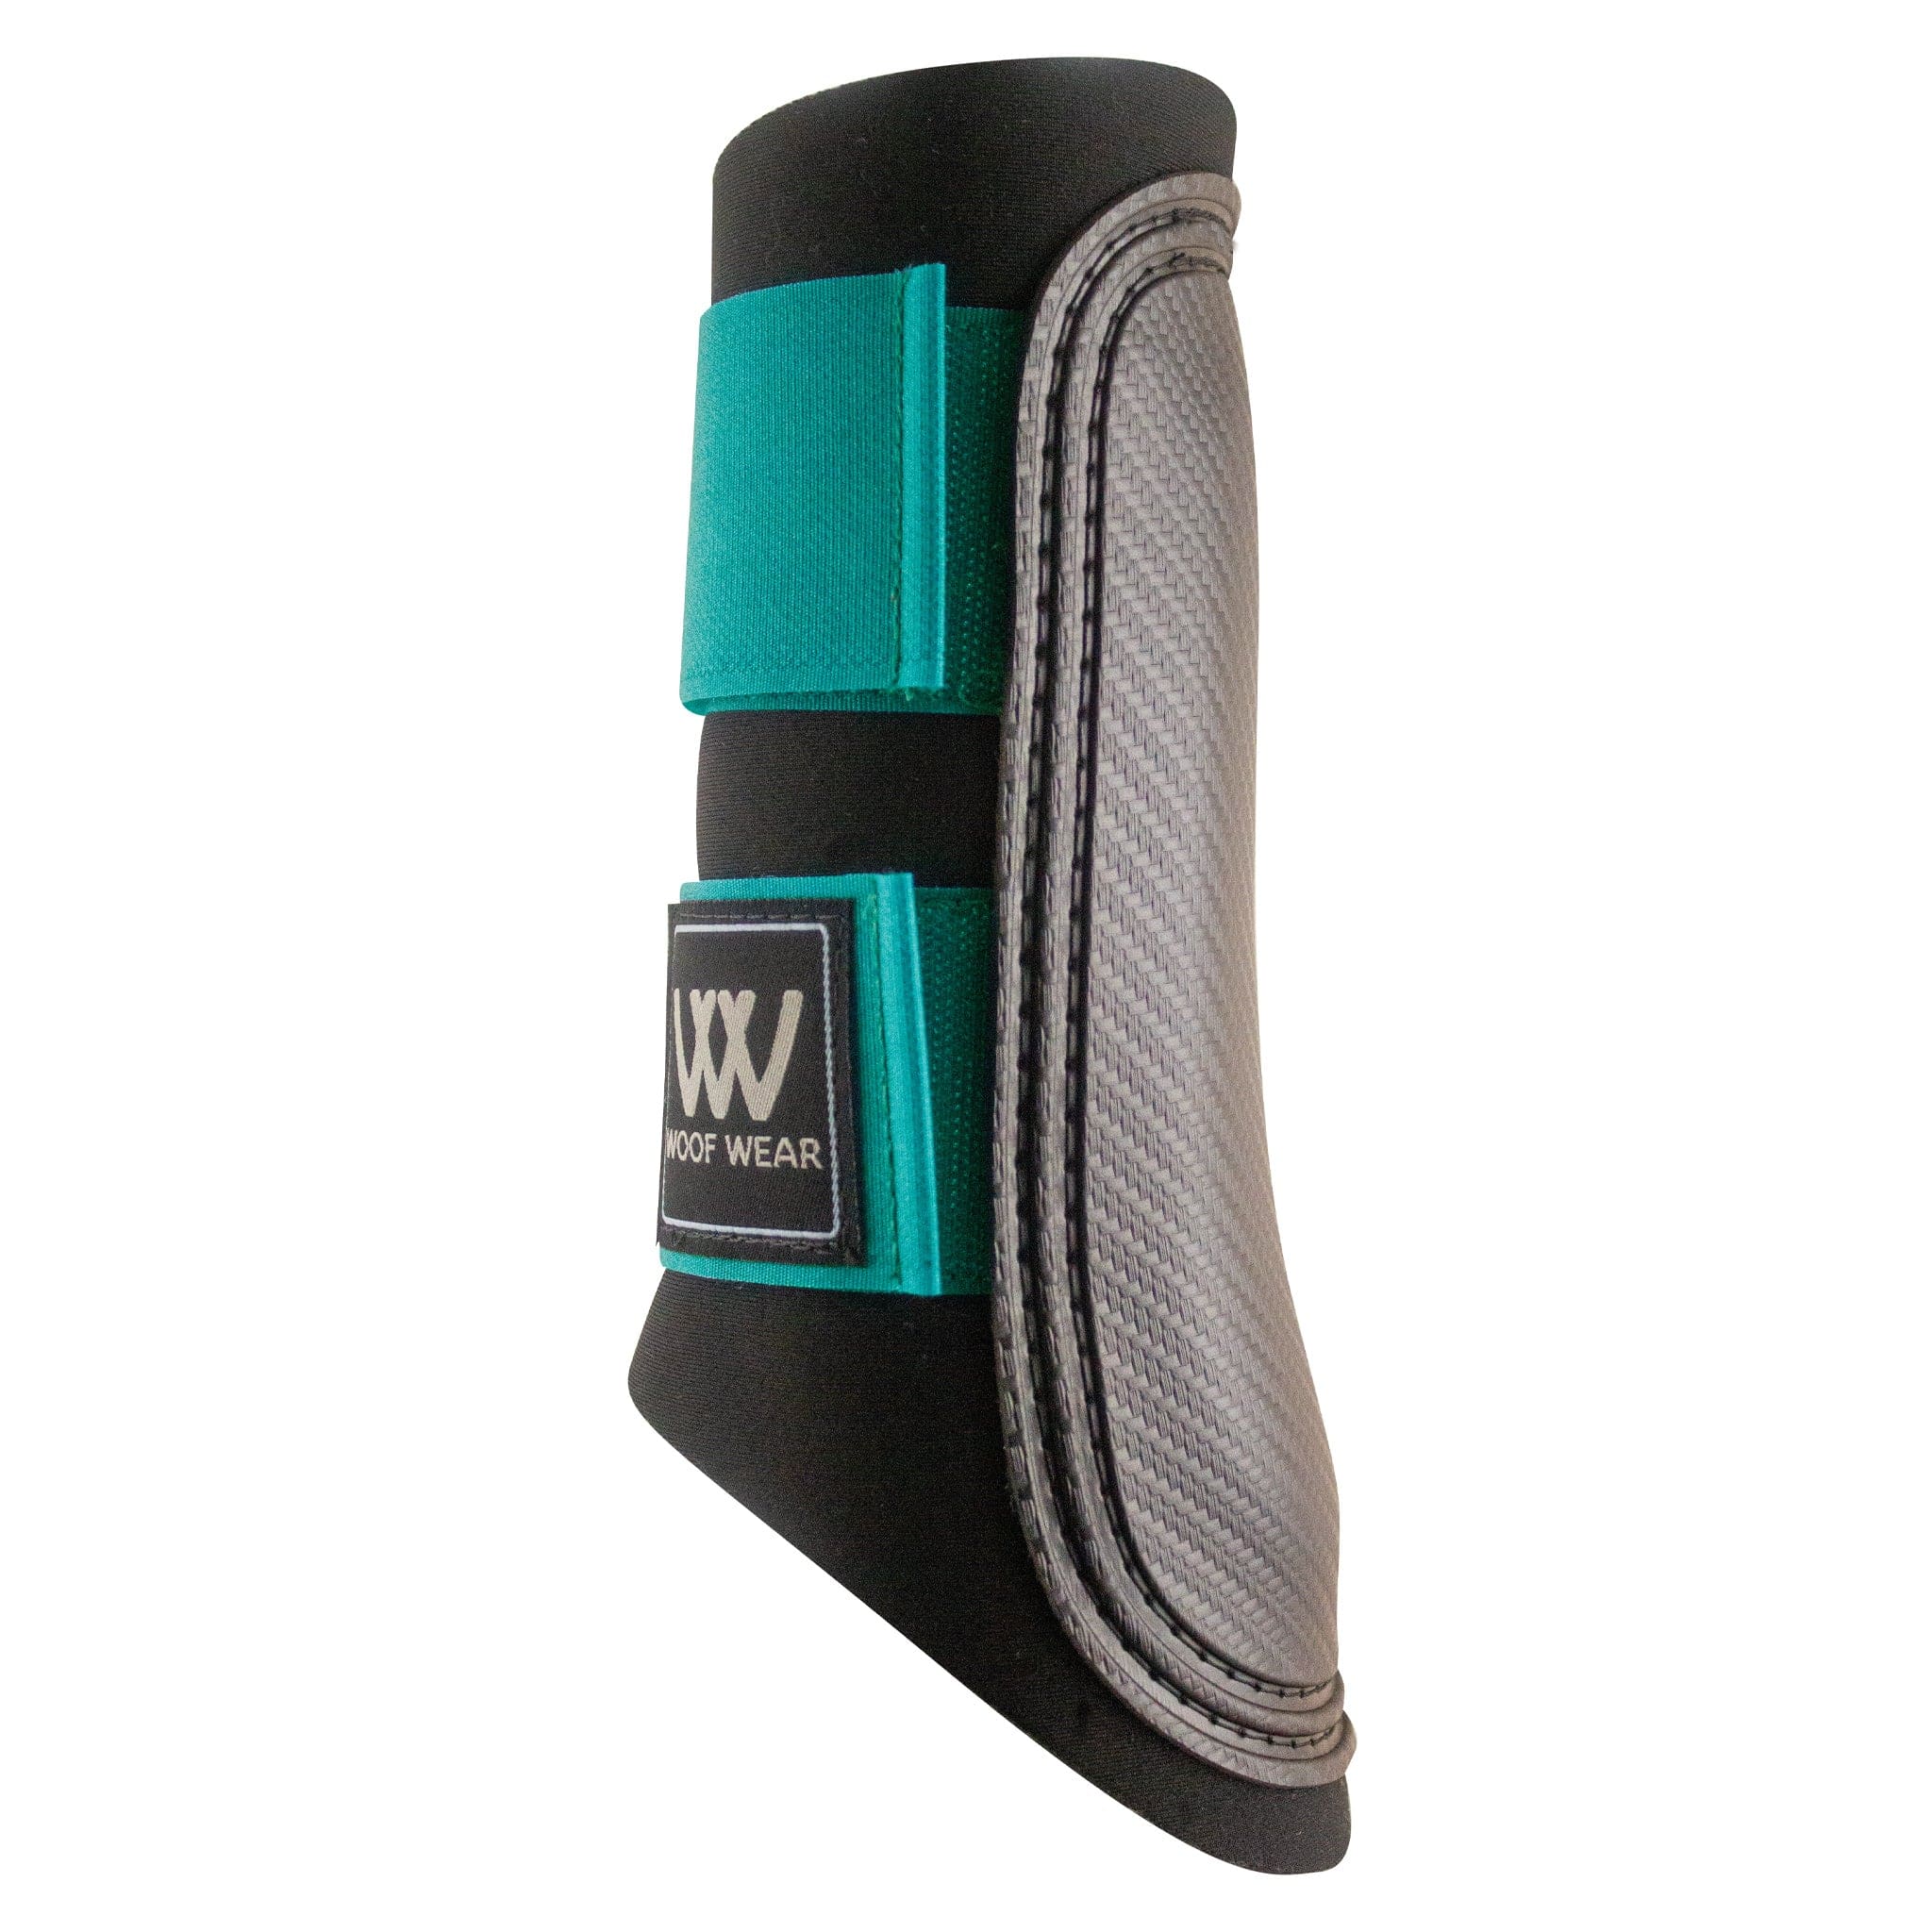 Woof Wear Colour Fusion Club Brushing Boots WB0003 Ocean